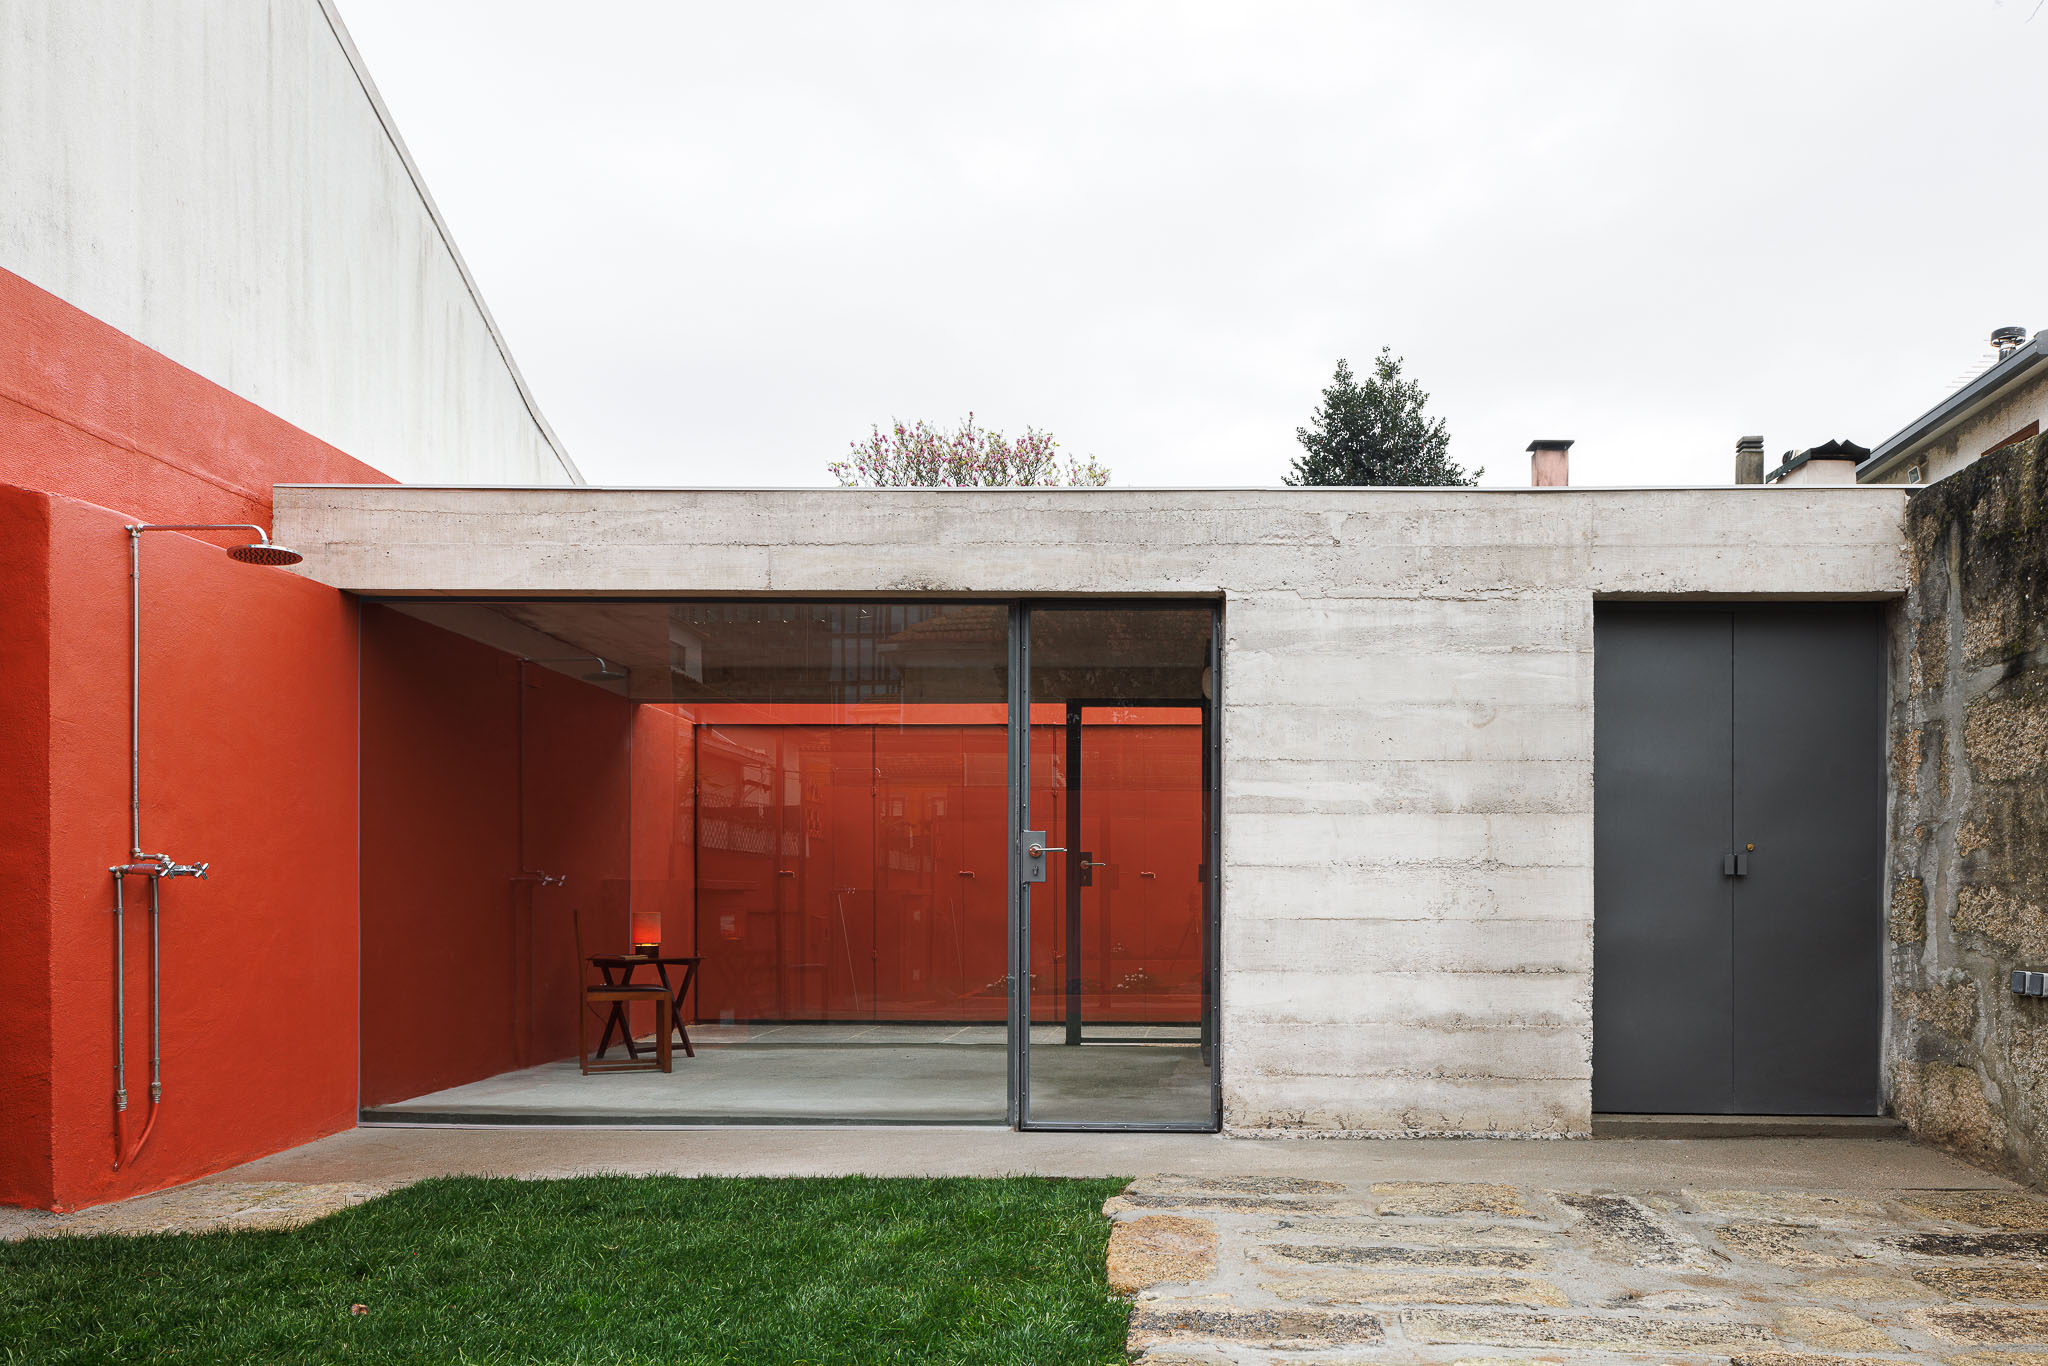 A Concrete Structure with A Spark of Bright Red Hue